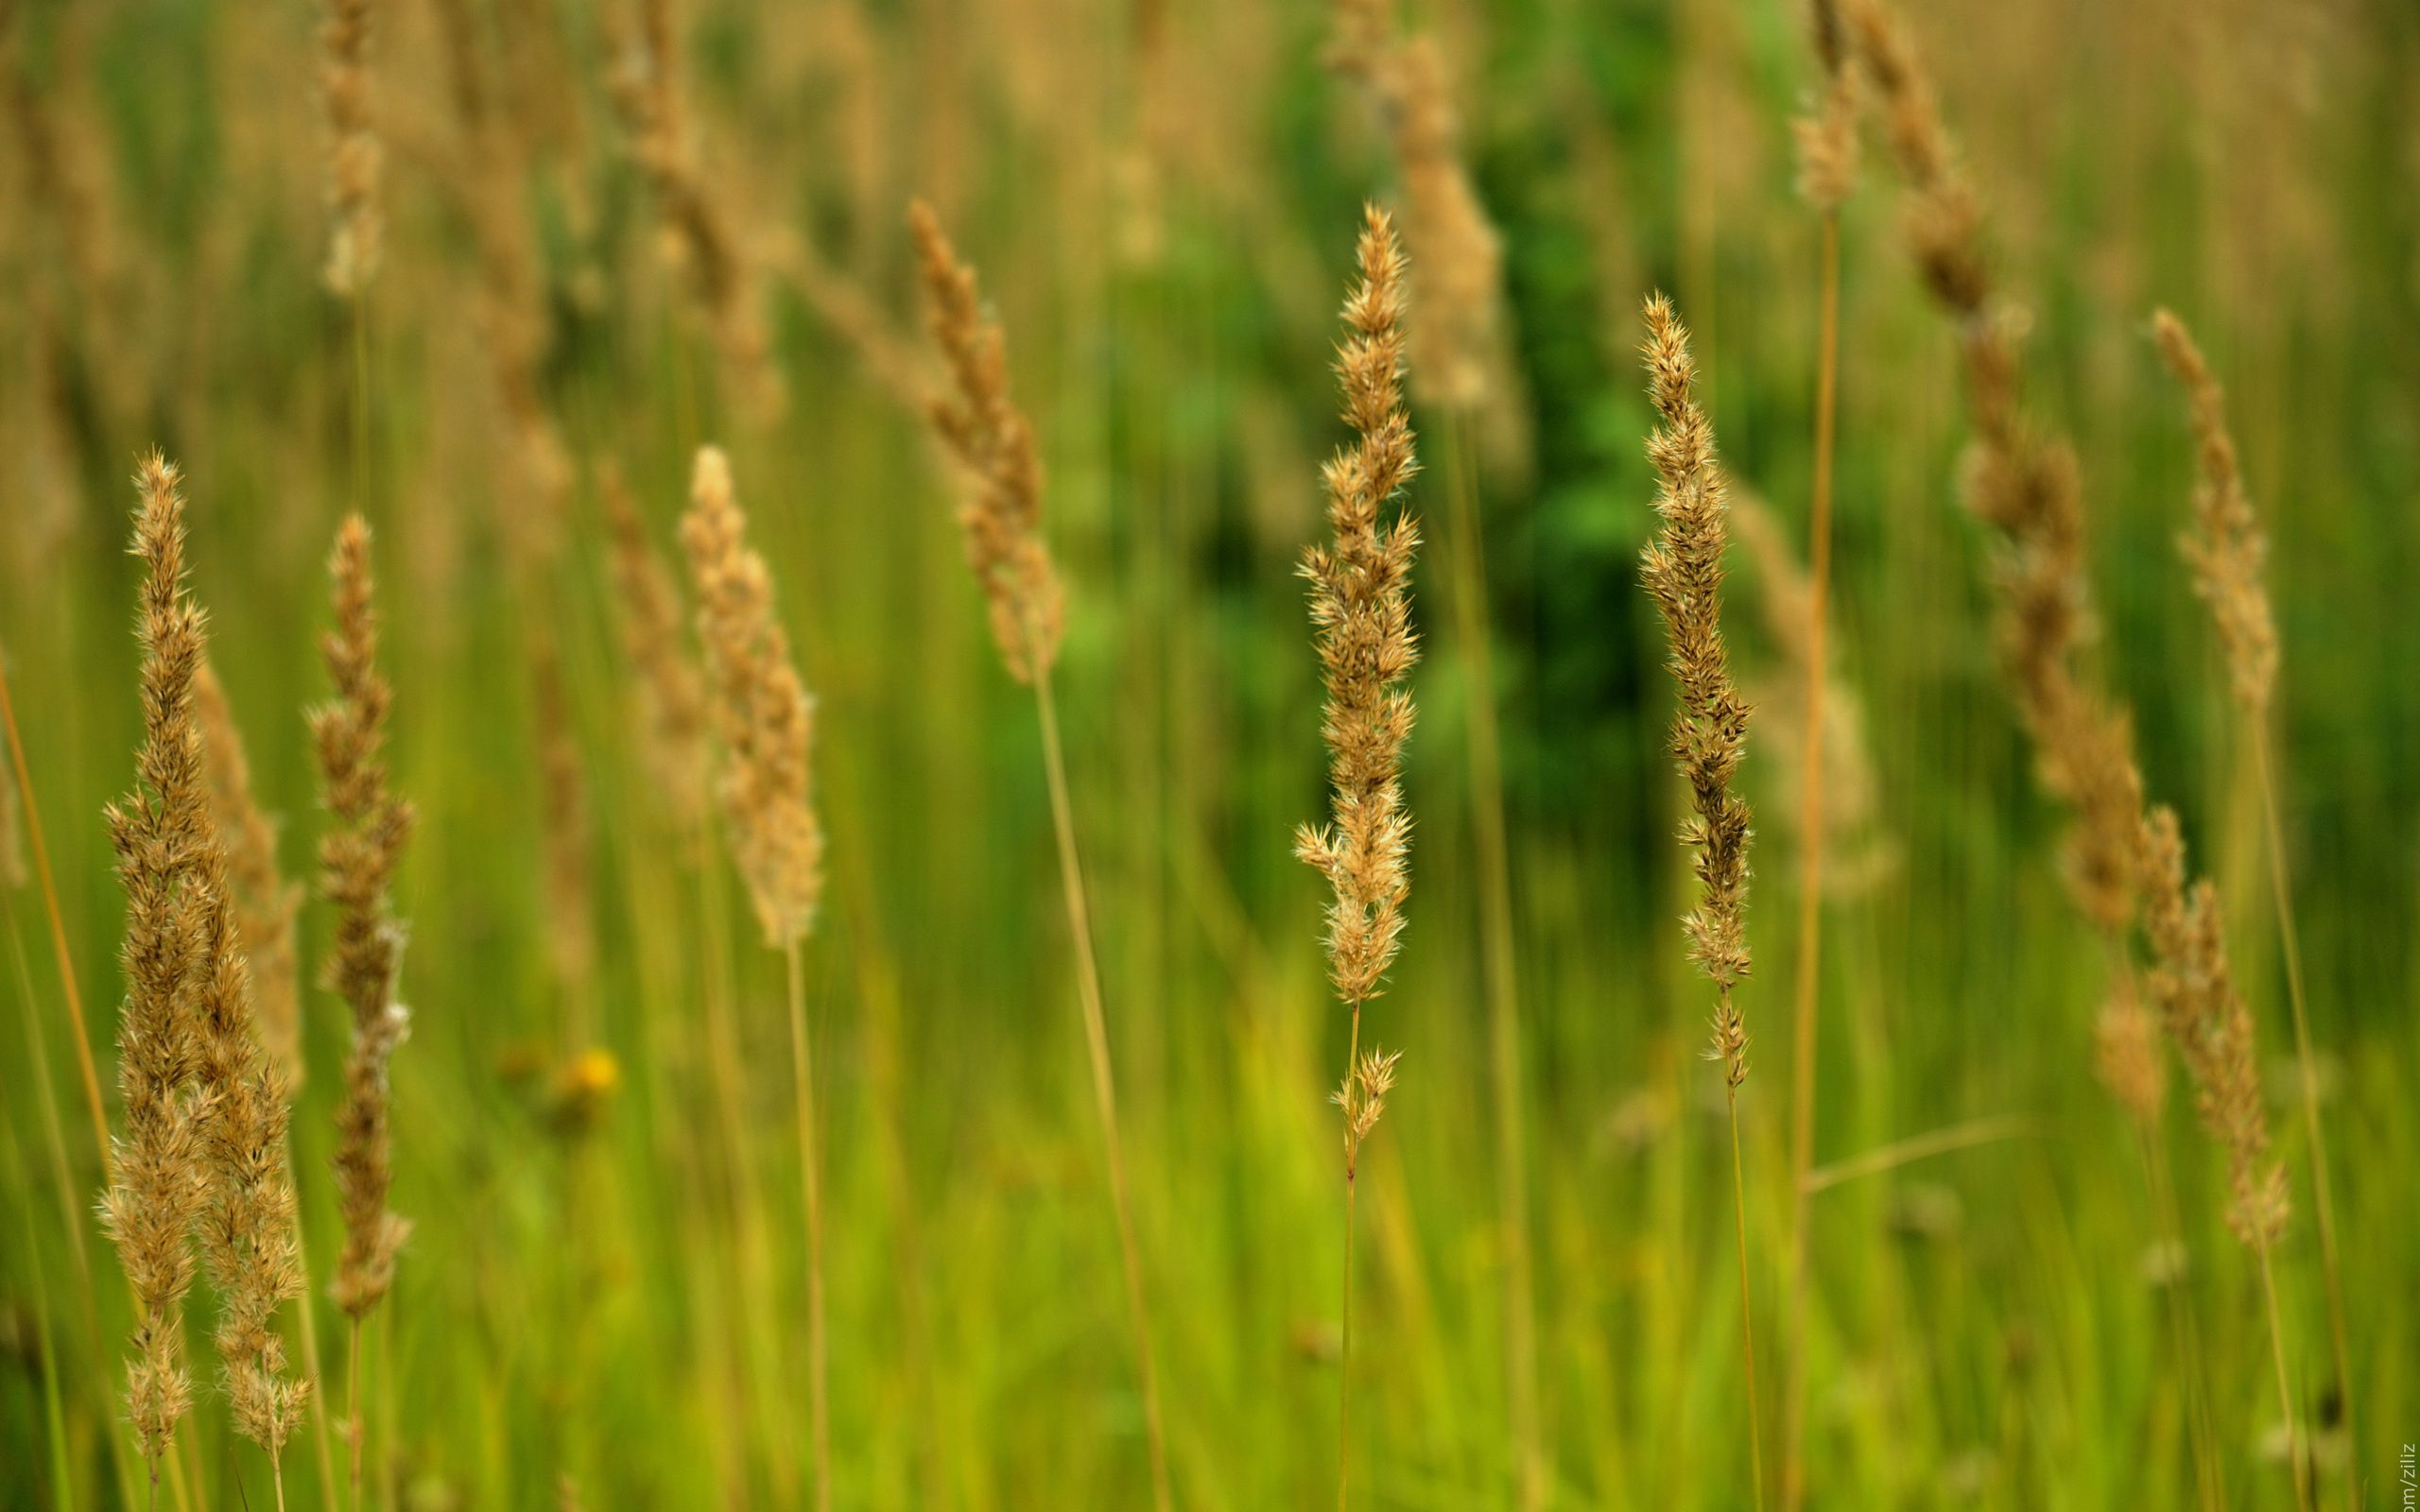 gold, nature, greens, field, ears, golden, spikes High Definition image